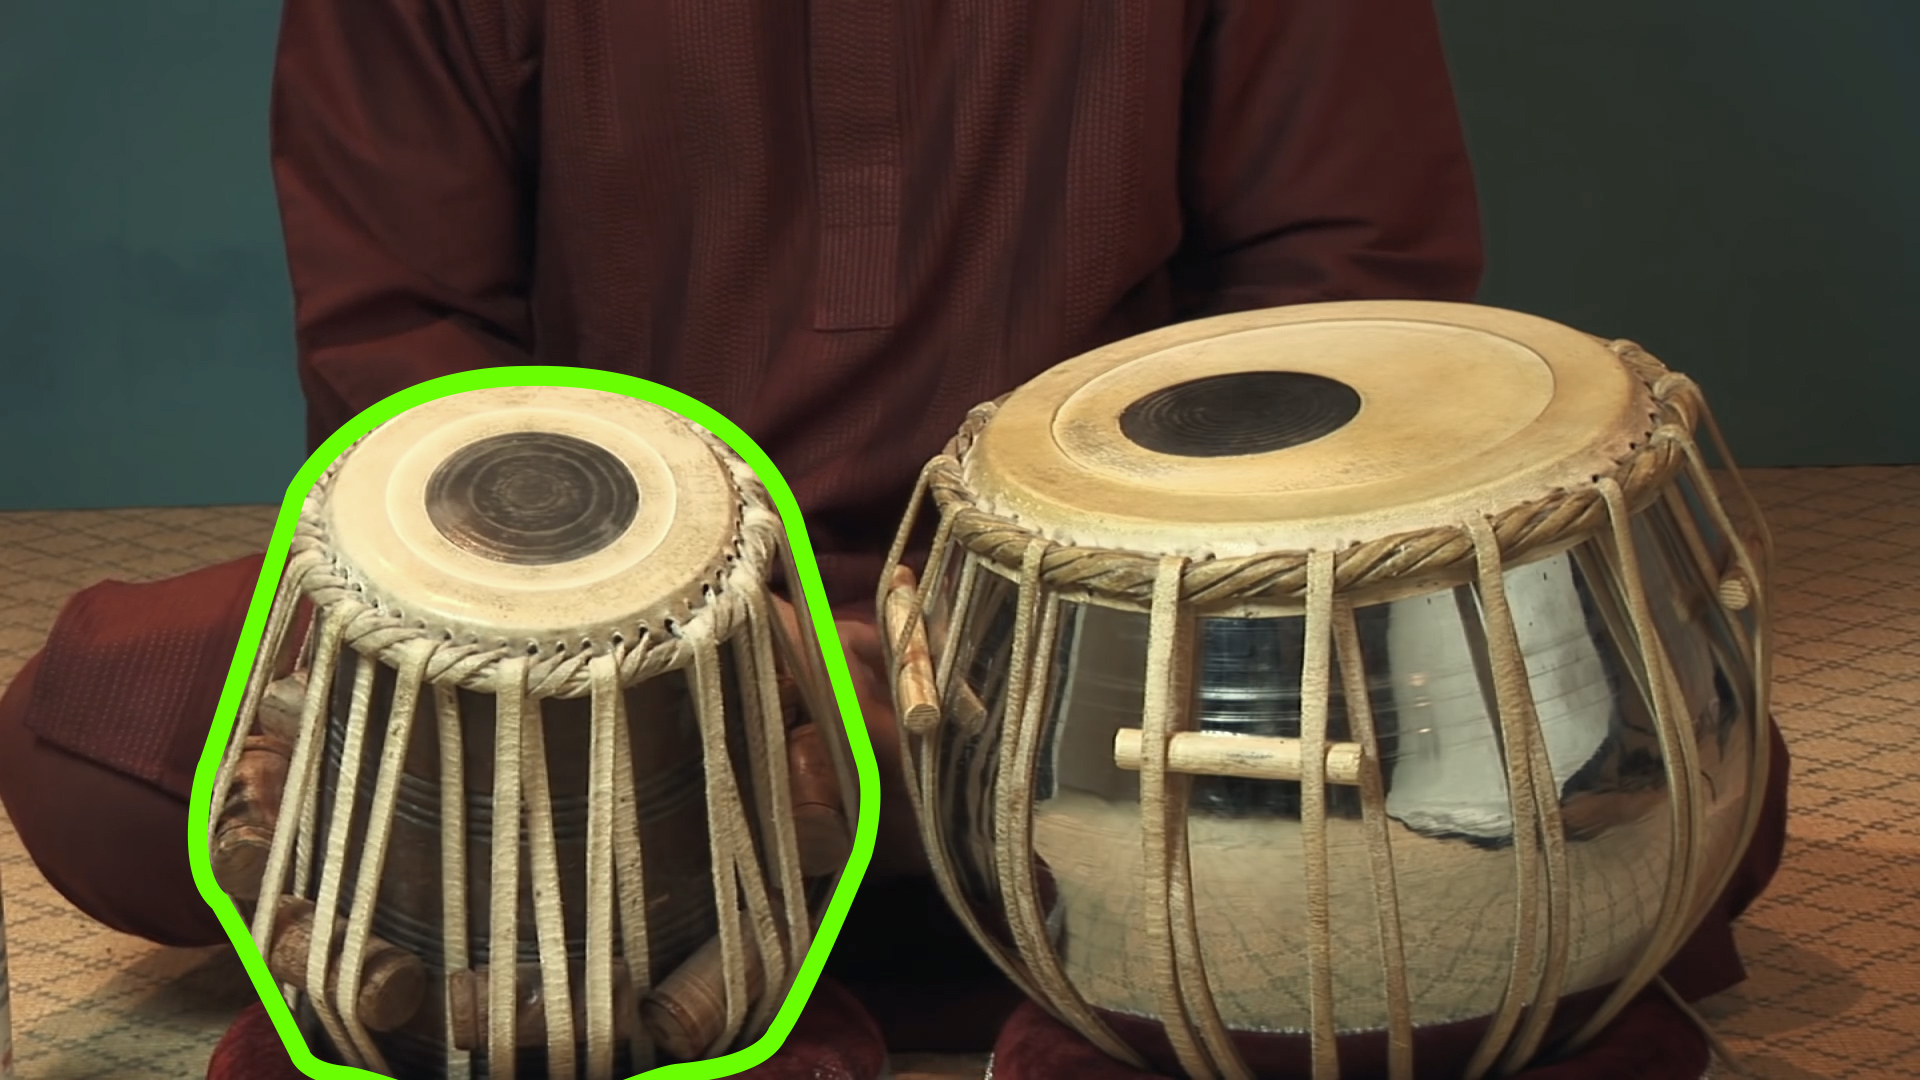 How To Play Tabla Wallpaper On Jakpost Travel